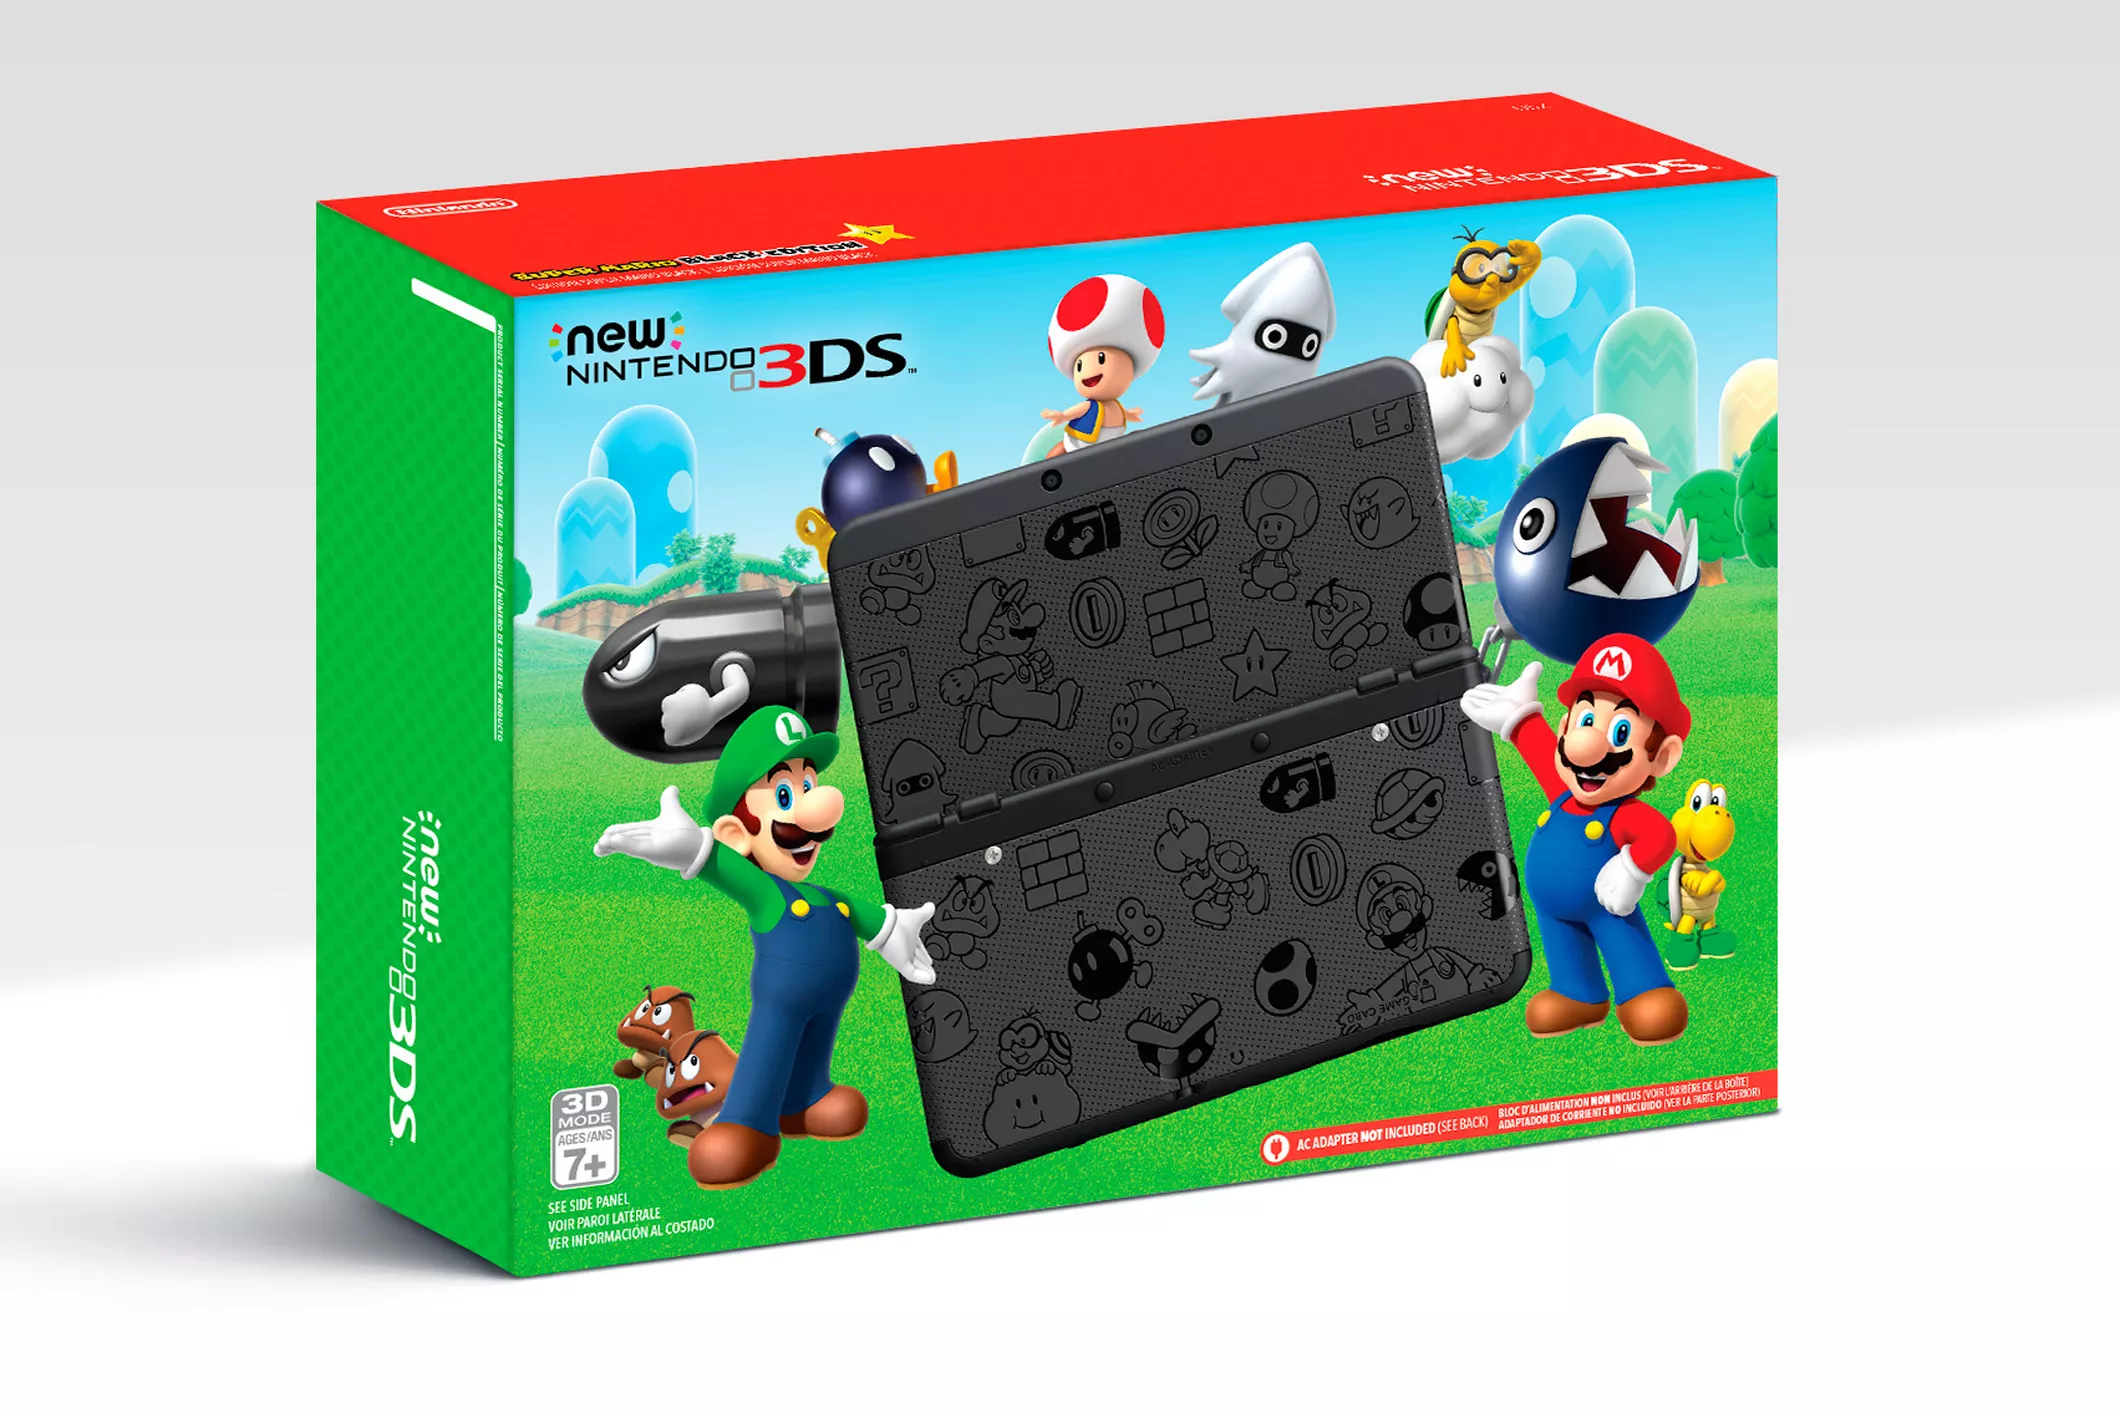 You Can Get the New Nintendo 3DS at a Huge Discount on Black Friday